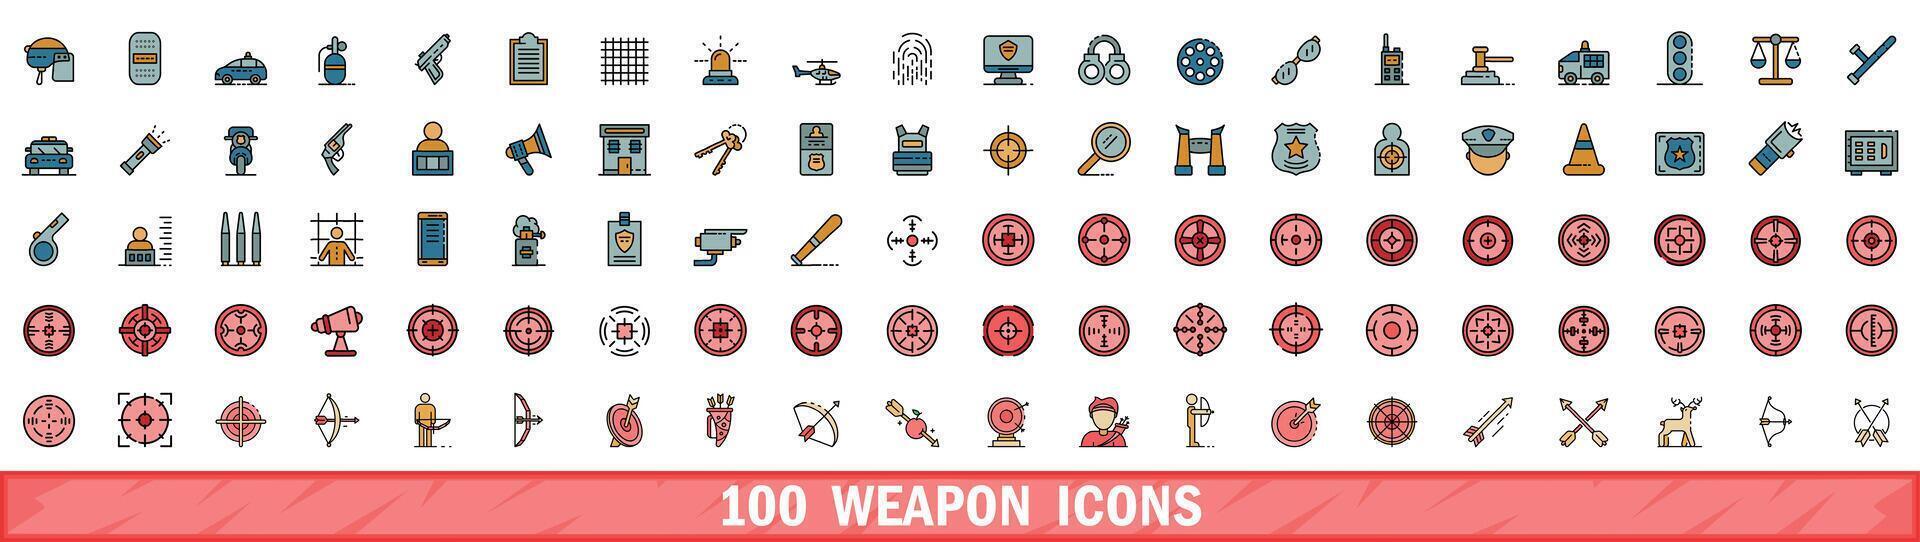 100 weapon icons set, color line style vector